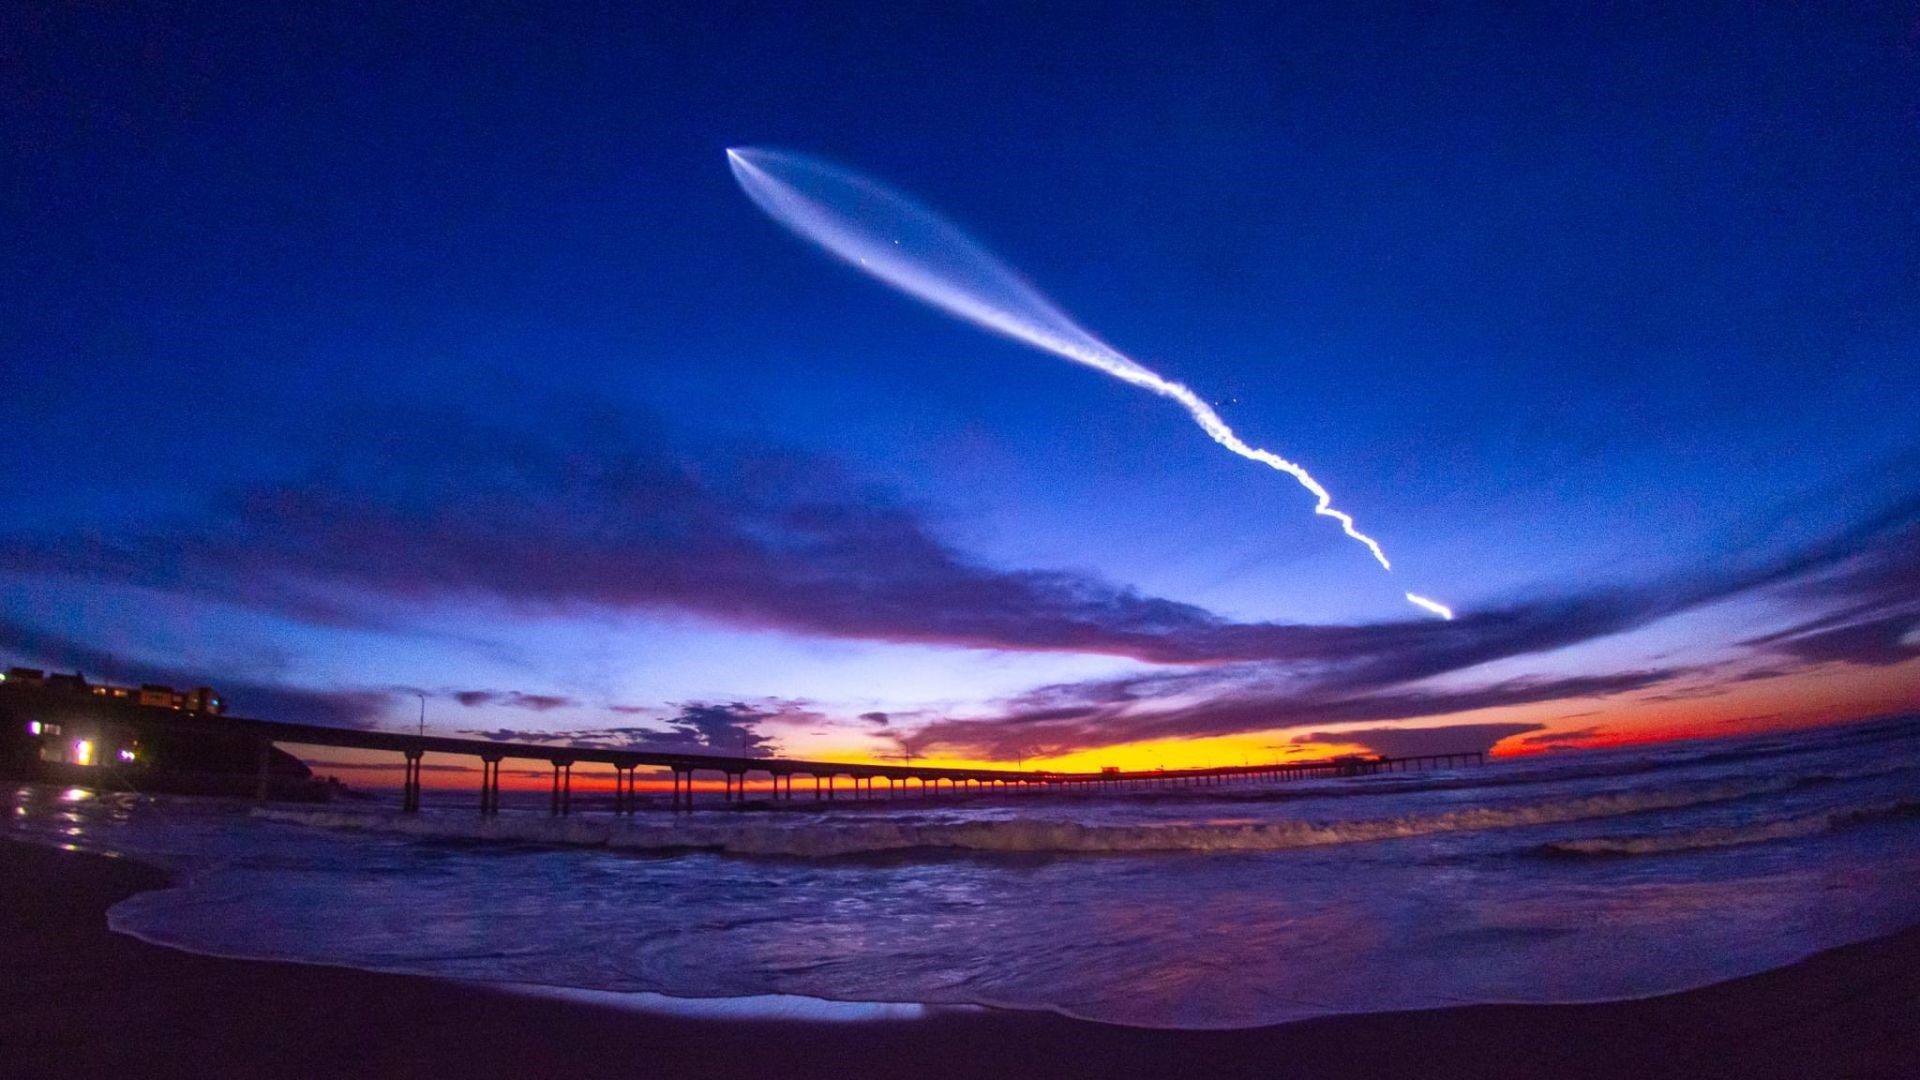 With the liftoff planned for 7:28 p.m. PT, it put the Falcon 9 just over San Diego, CA as the sun set.